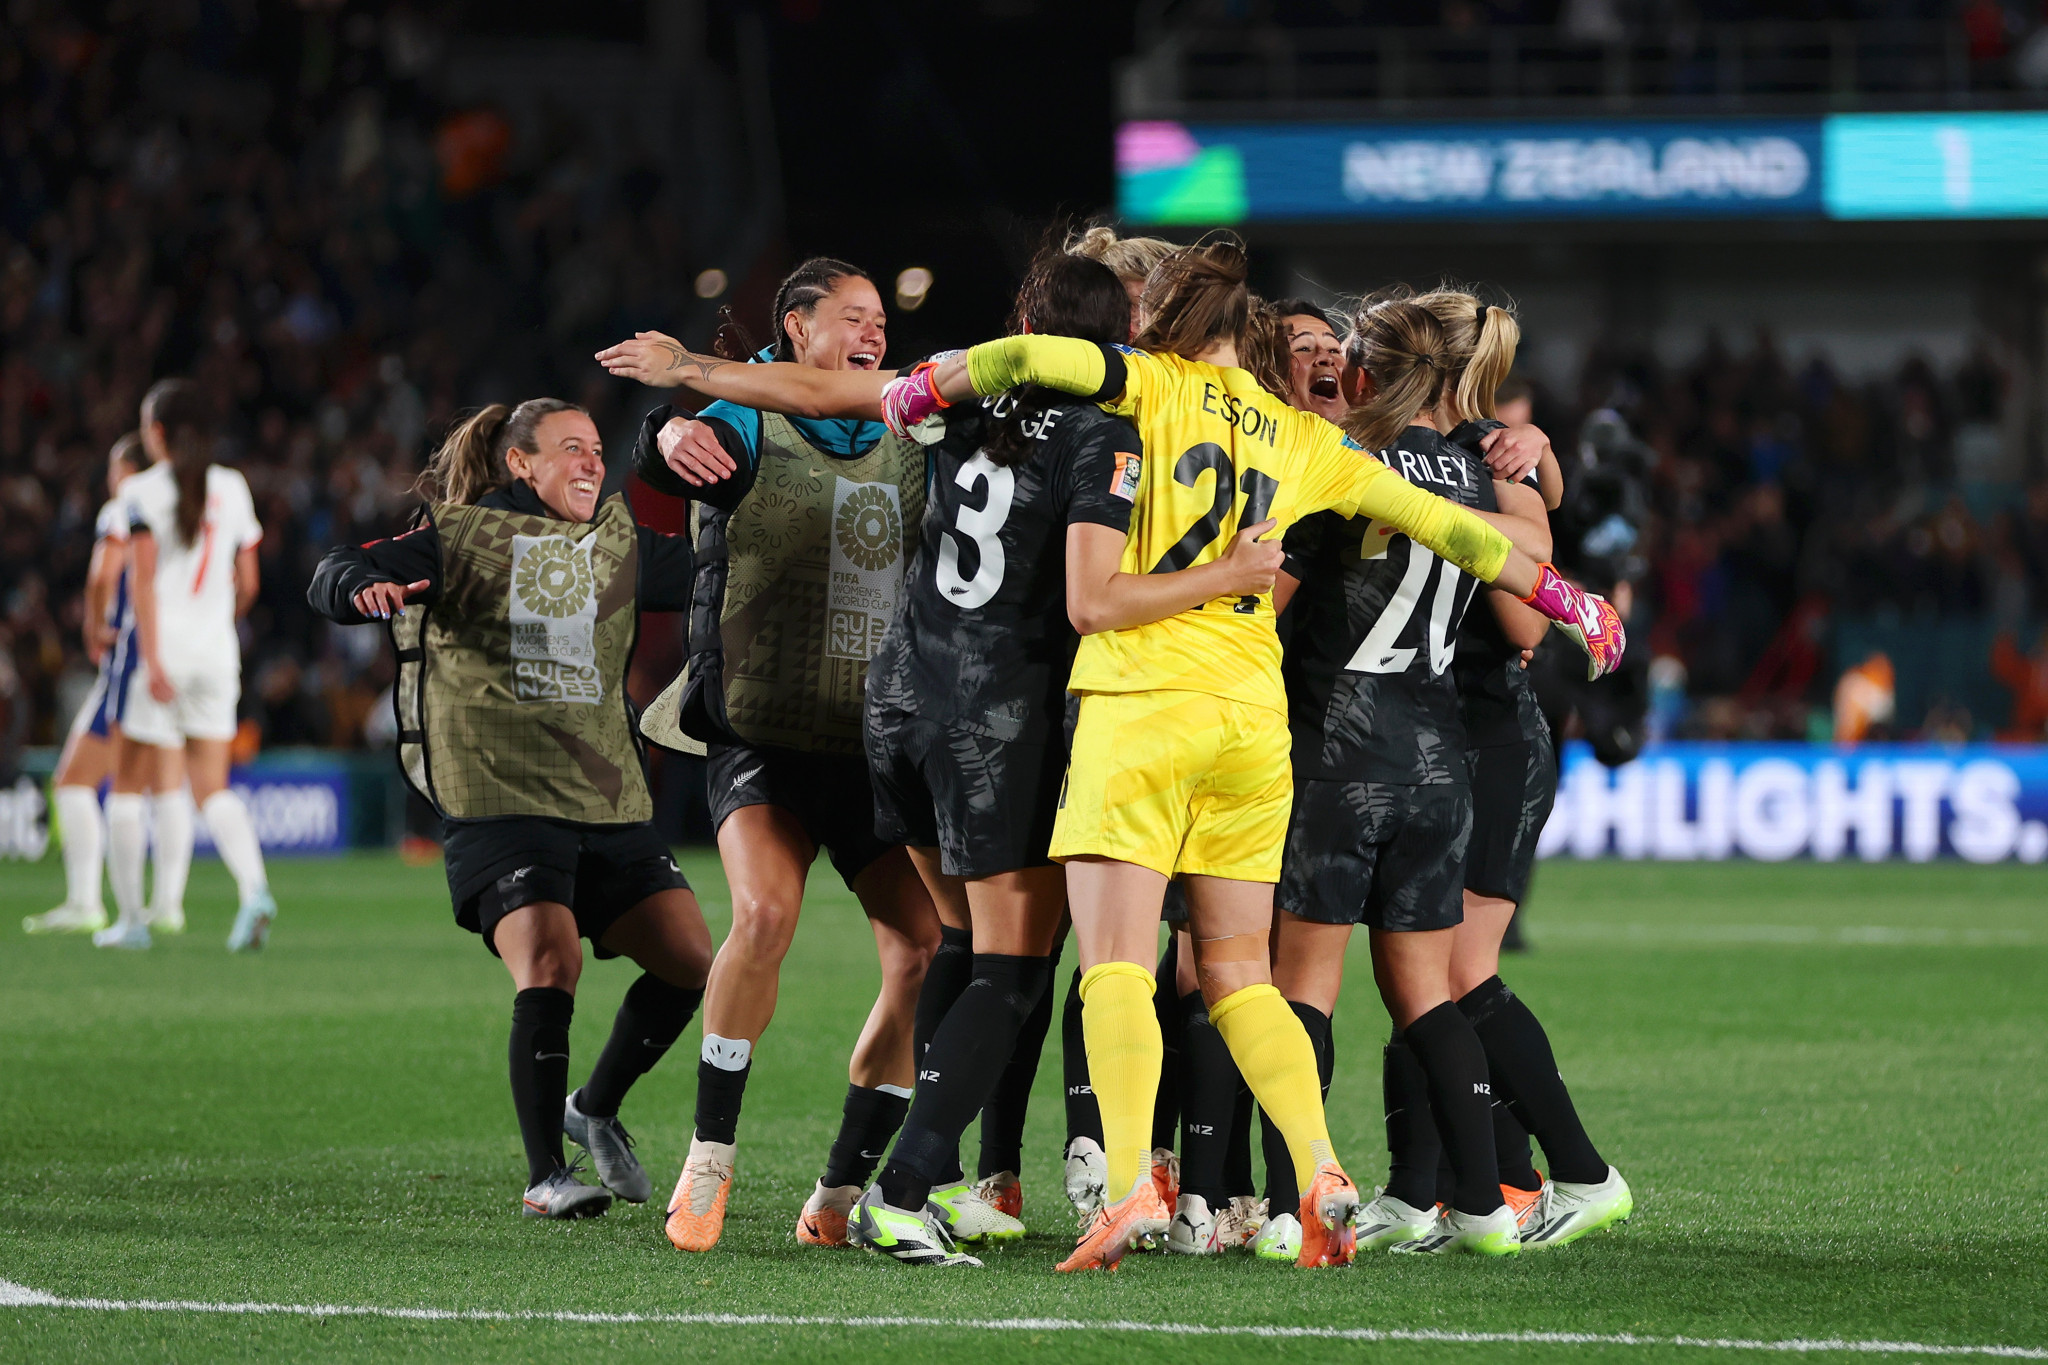 New Zealand claim historic FIFA Women’s World Cup win after tragedy